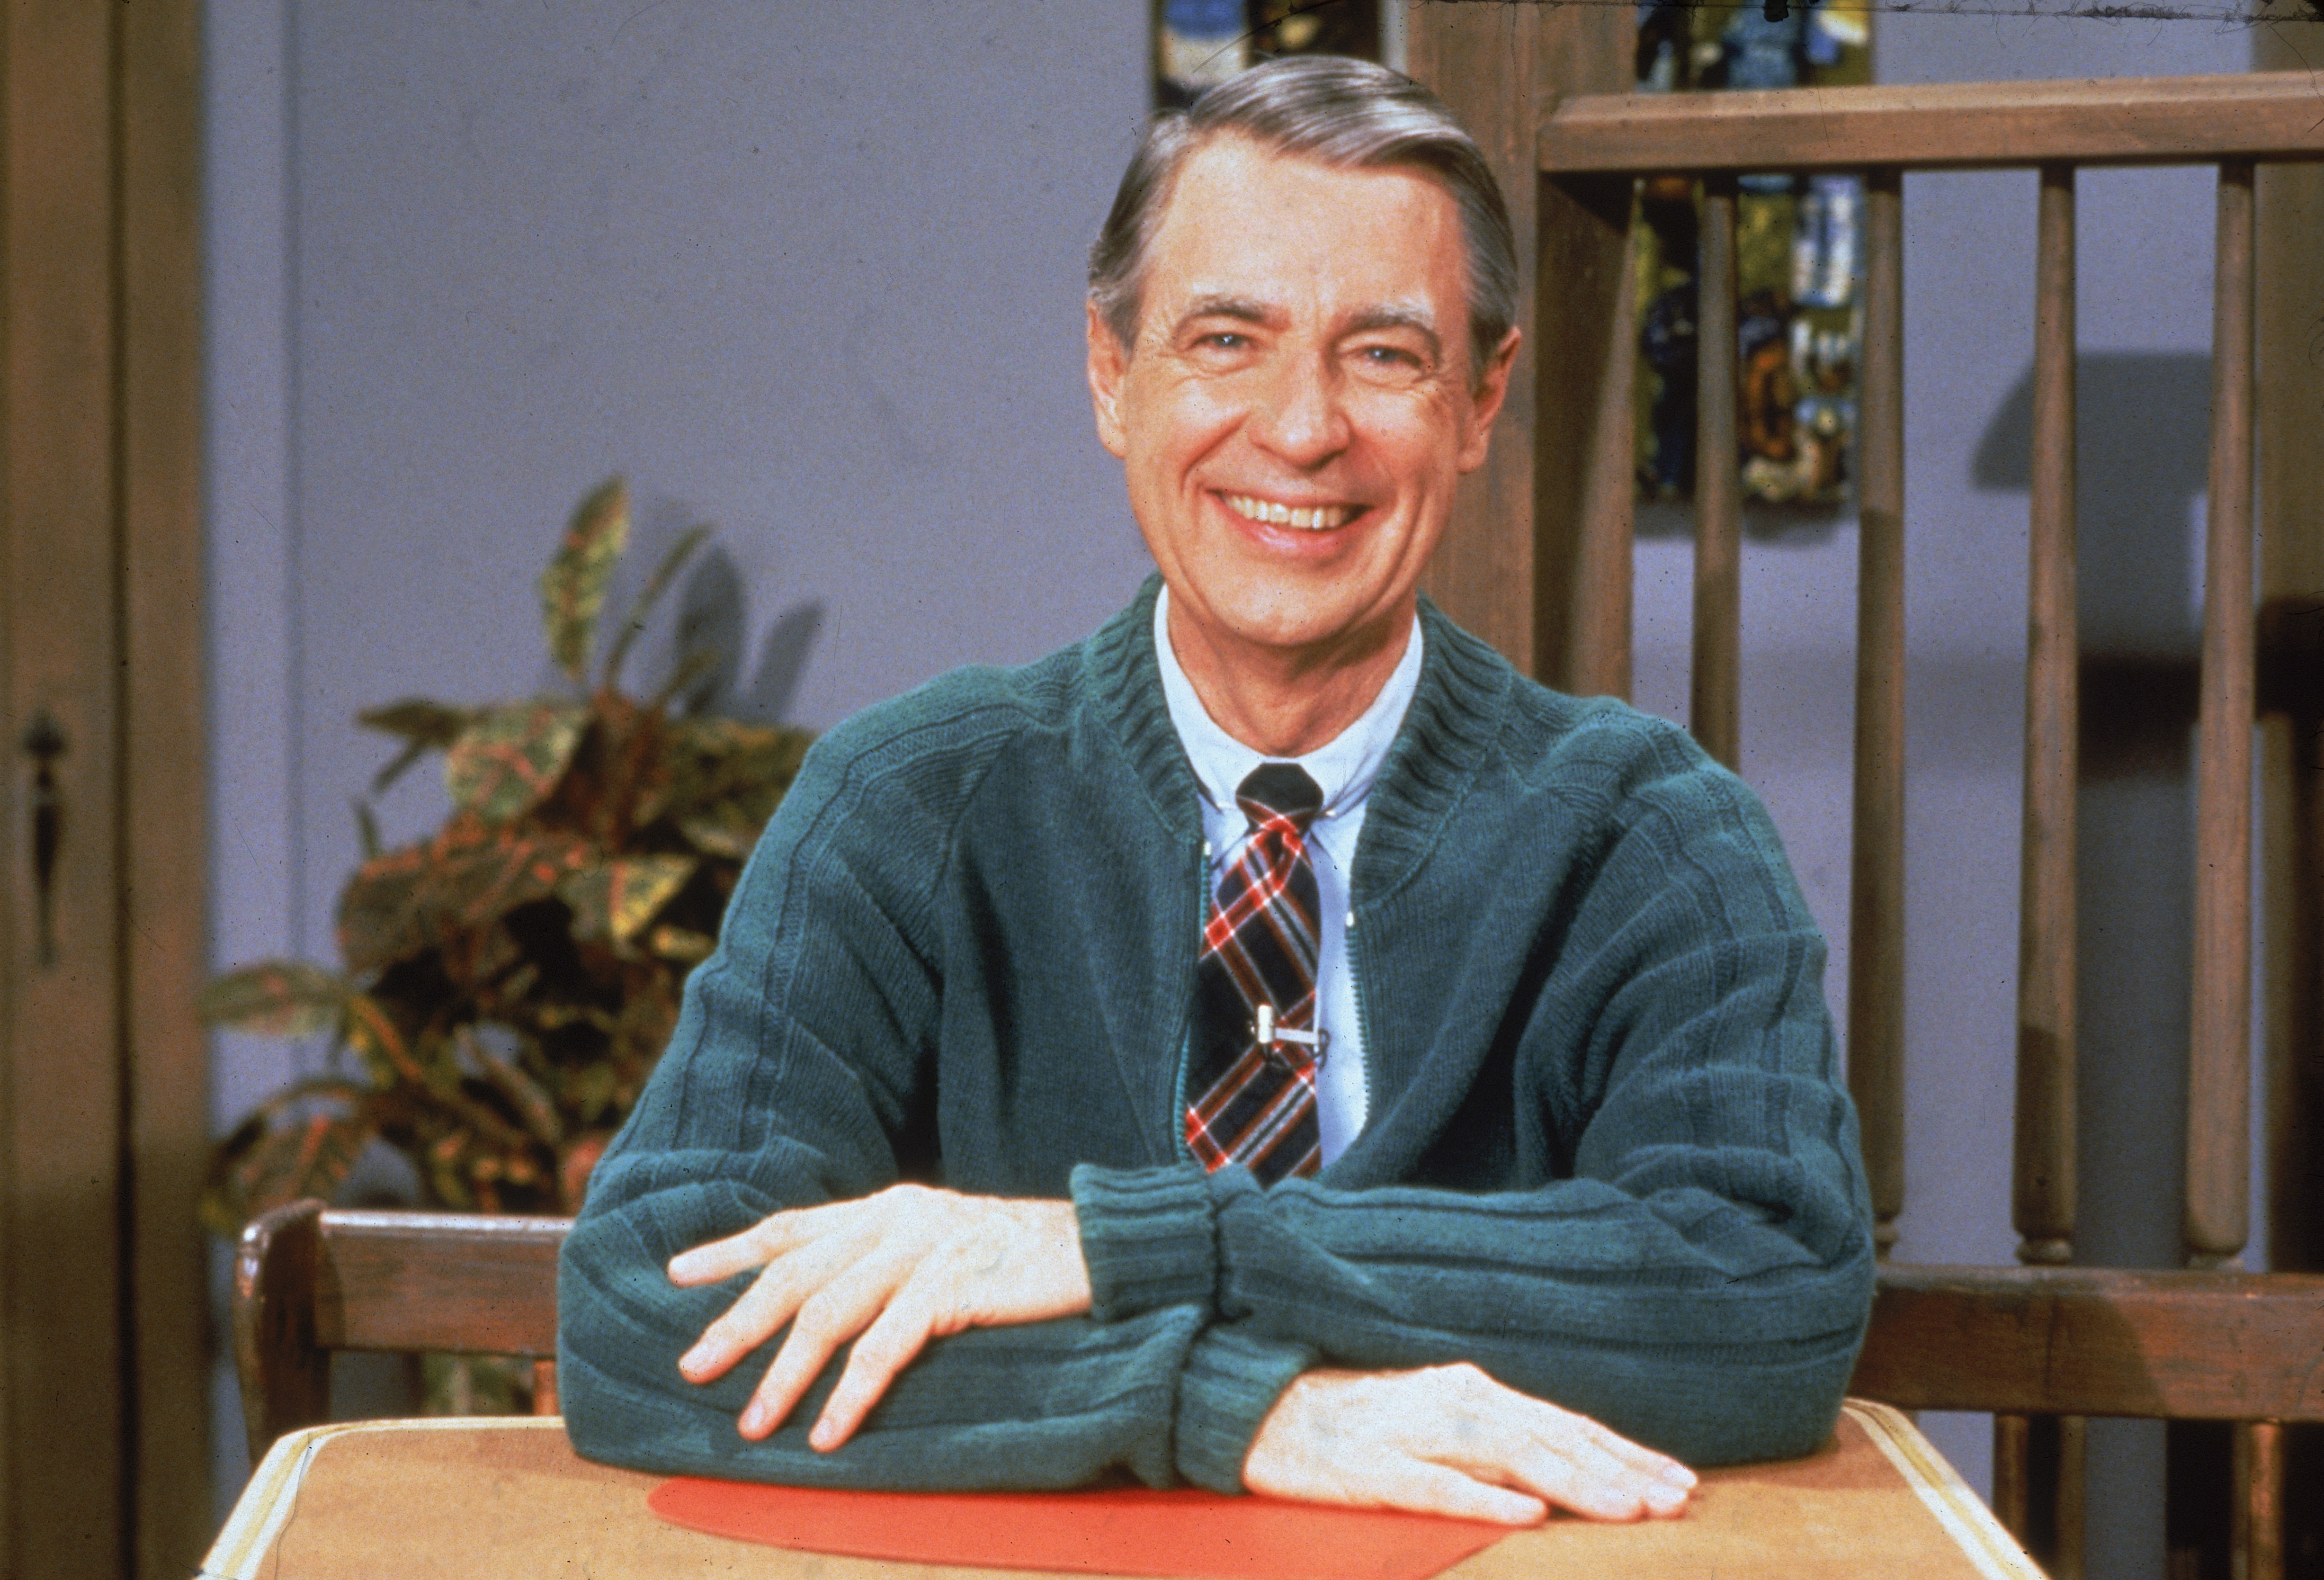 ‘Won’t You Be My Neighbor?’ Will Remind You To Be A Bit More Neighborly